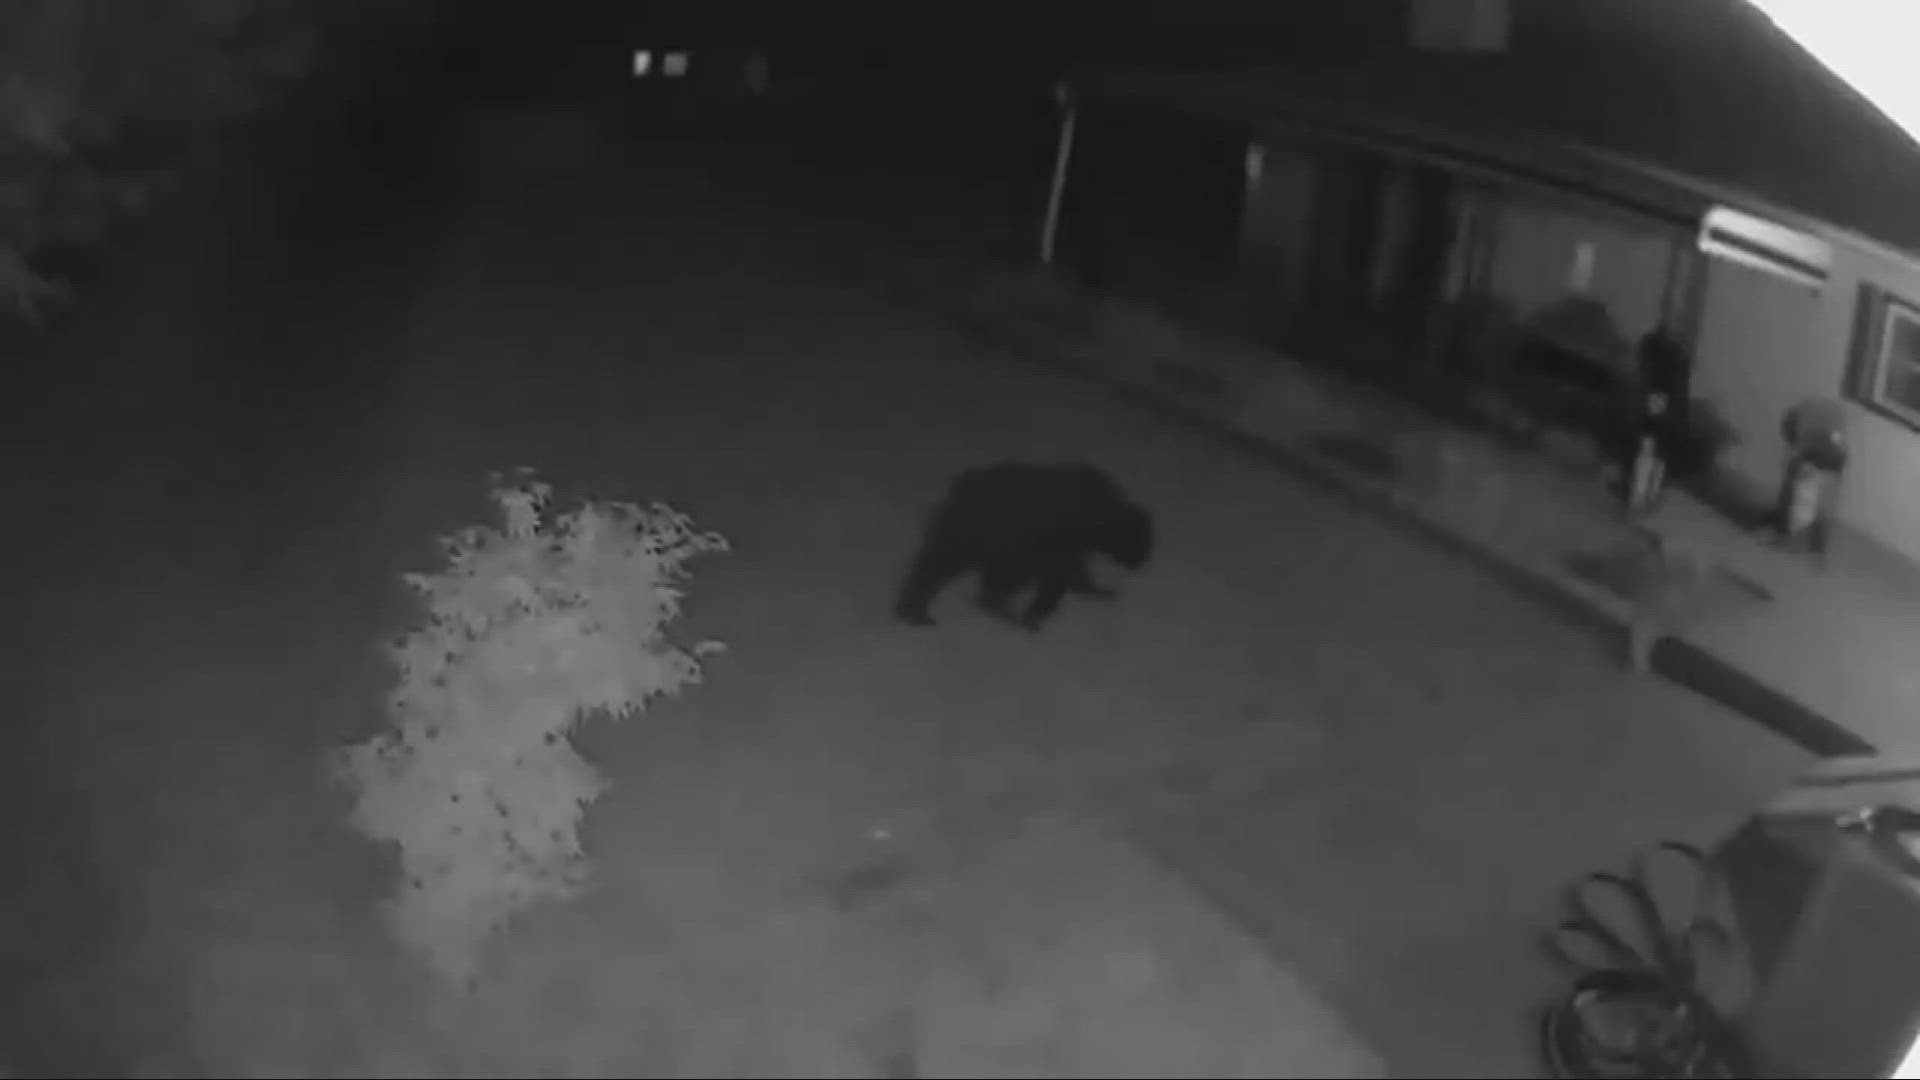 A resident in Lake County got an unexpected visit this weekend when a black bear turned up on the footage of her home security system.